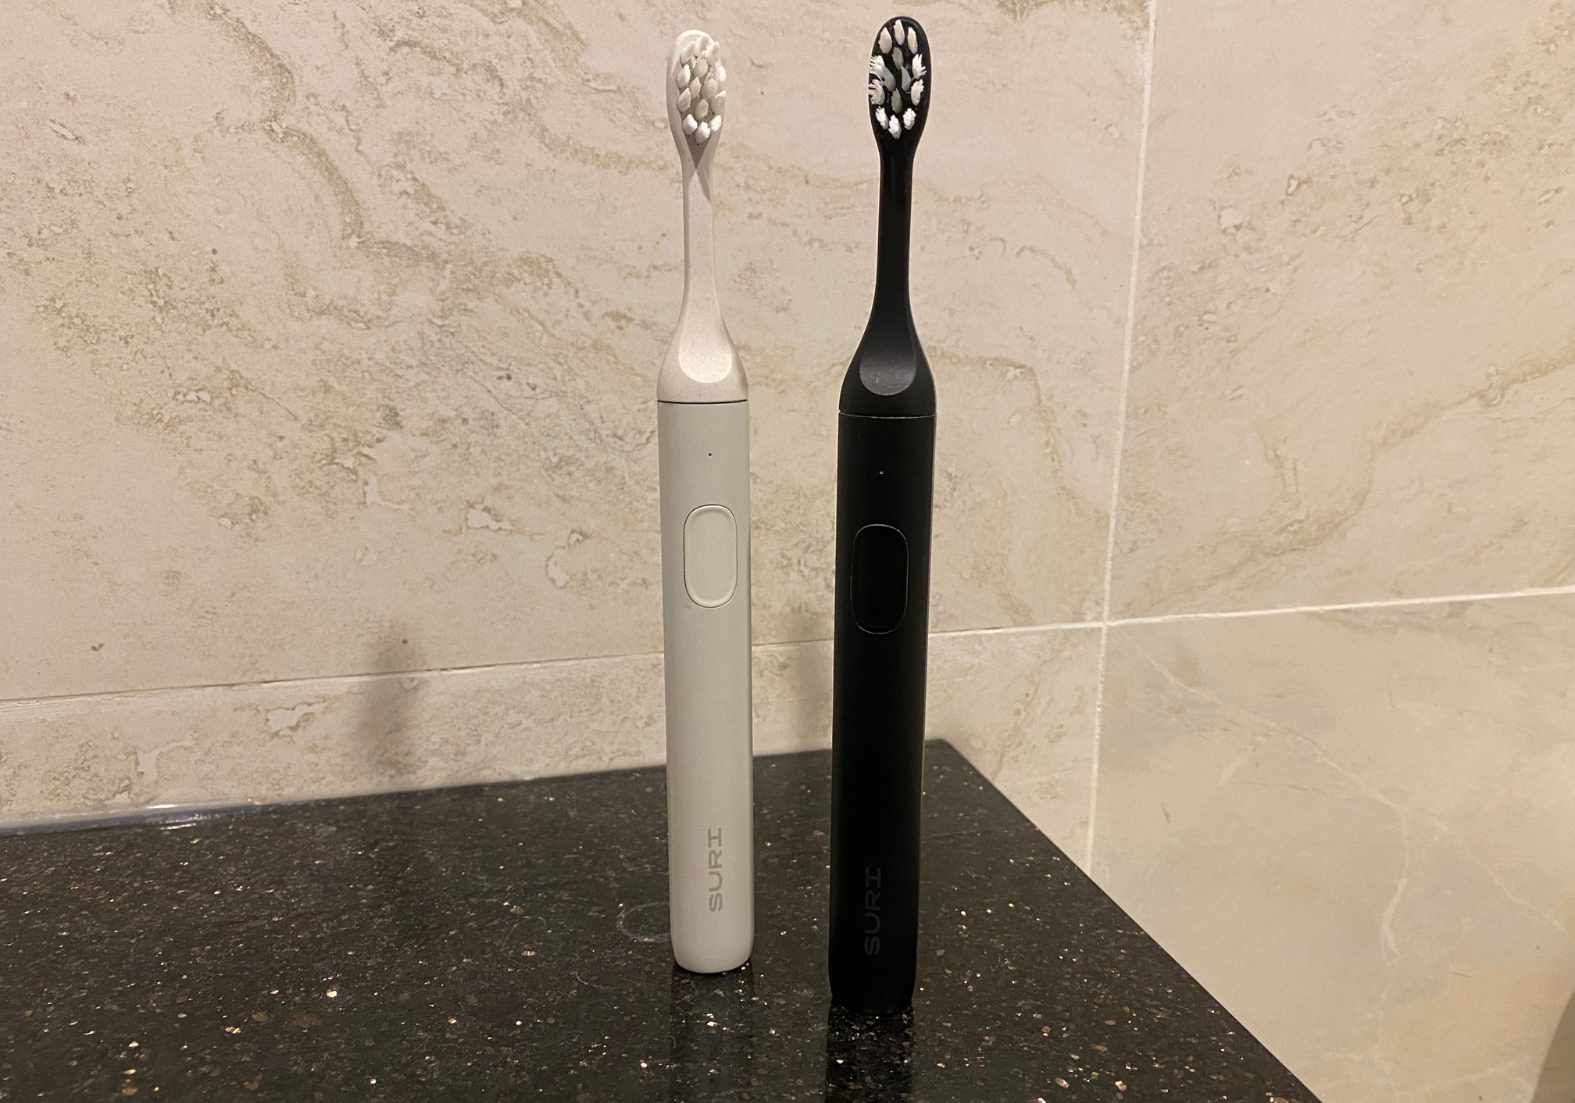 Two Suri toothbrushes next to each other on a bathroom shelf for this Suri toothbrush review